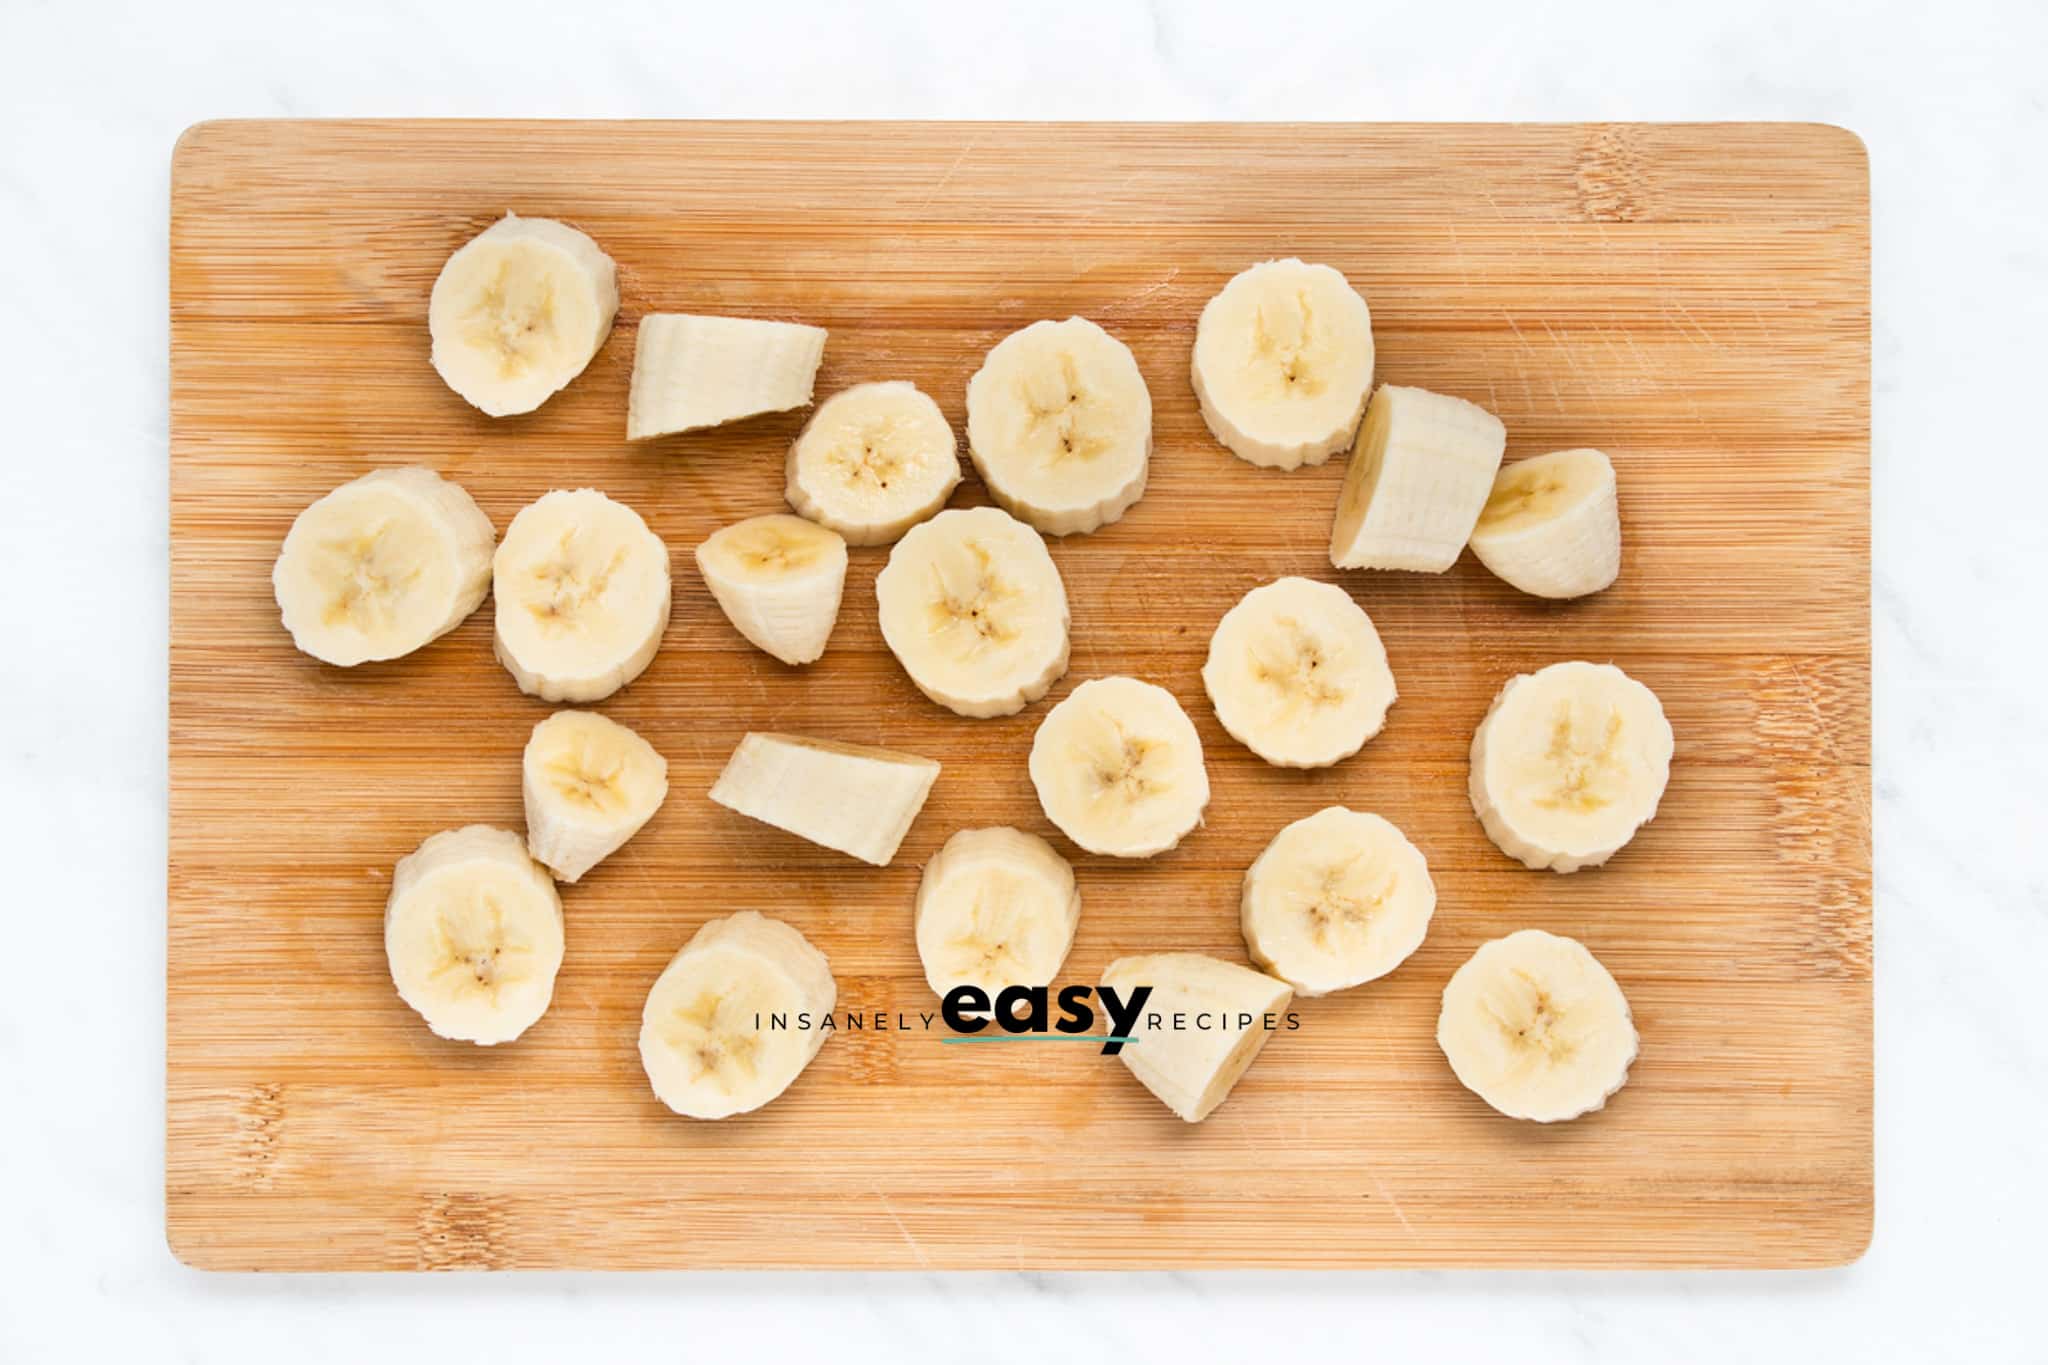 Top view photo of sliced bananas on a wooden cutting board.